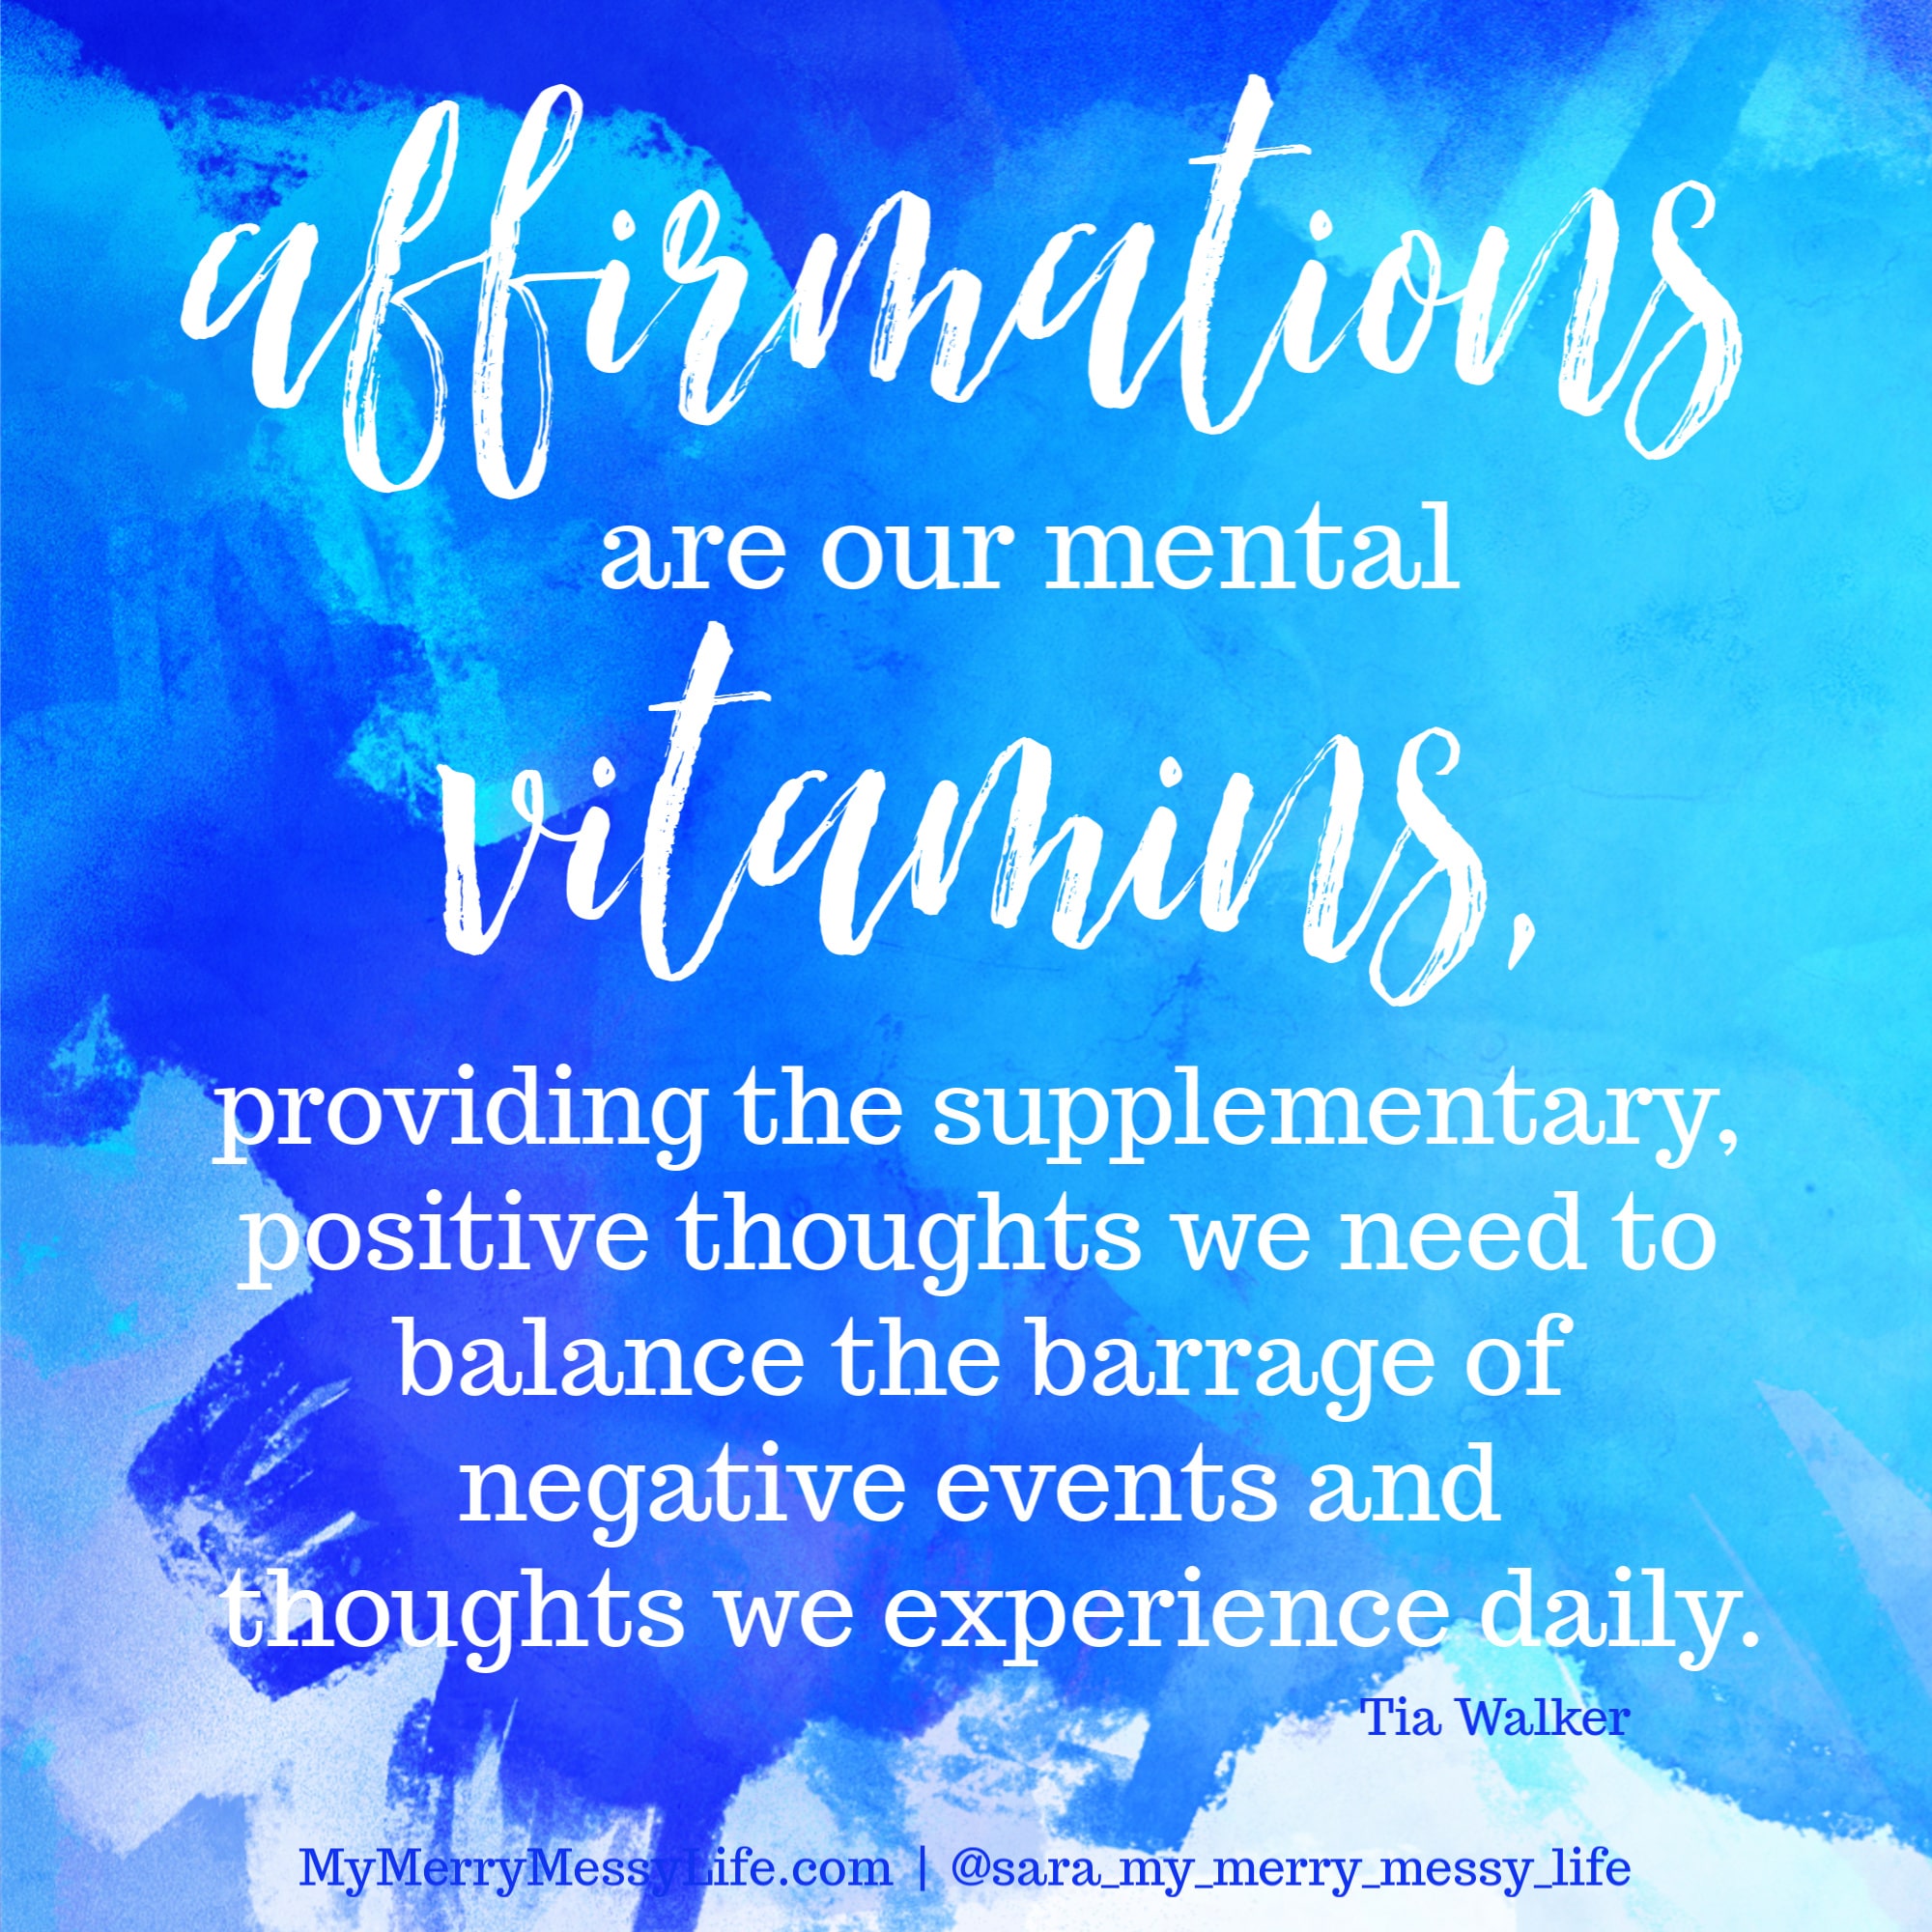 Affirmations are our mental vitamins, providing the supplementary, positive thoughts we need to balance the barrage of negative events we experience daily. - Tia Walker || MyMerryMessyLife.com